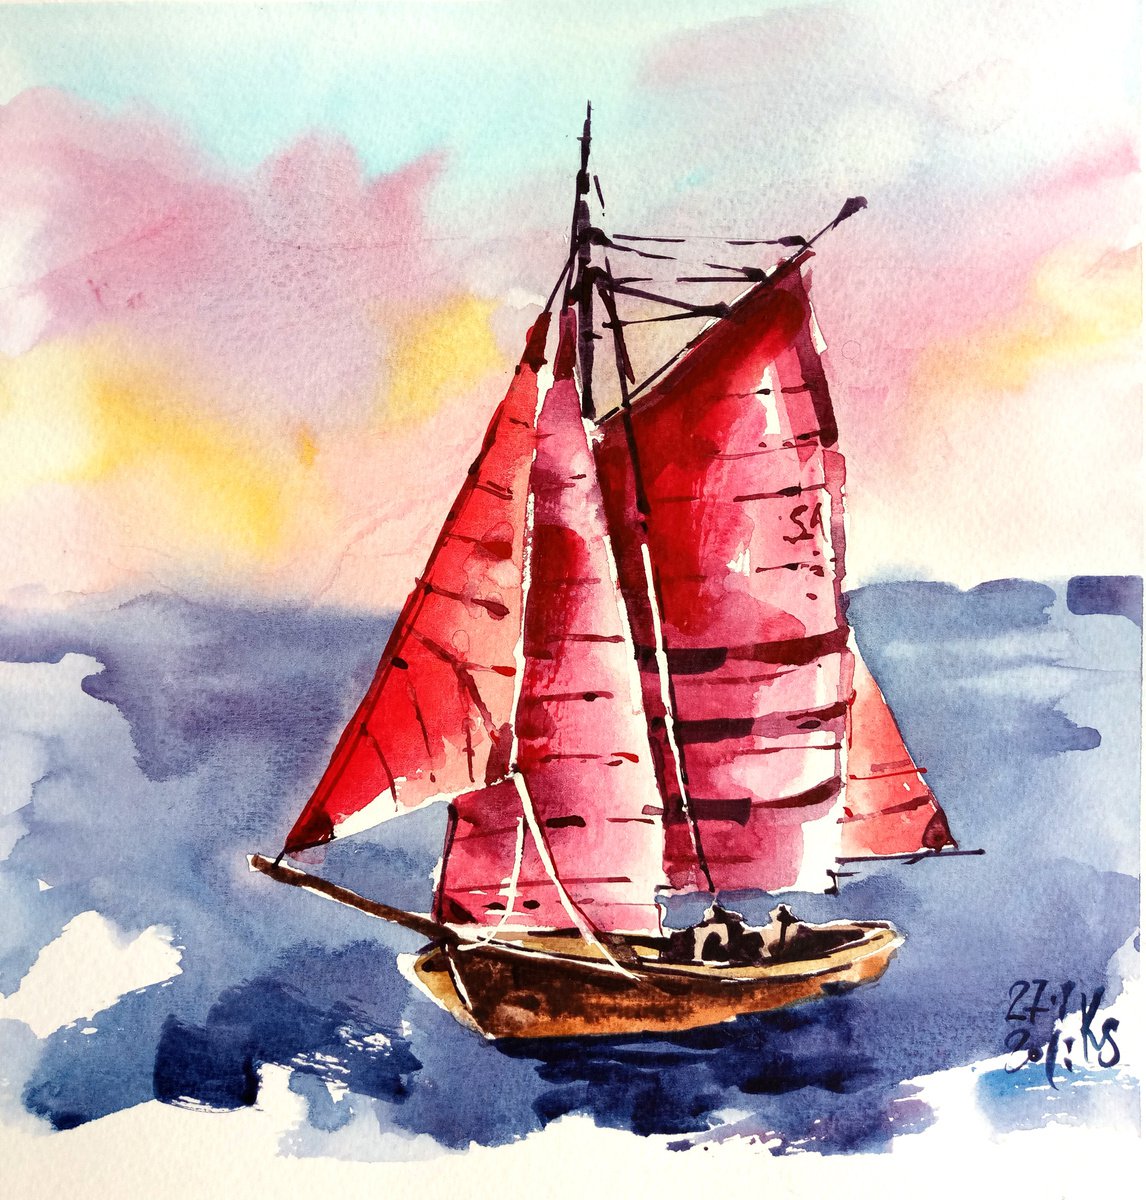 Scarlet sails seascape with a yacht against the sunset sky watercolor painting by Ksenia Selianko